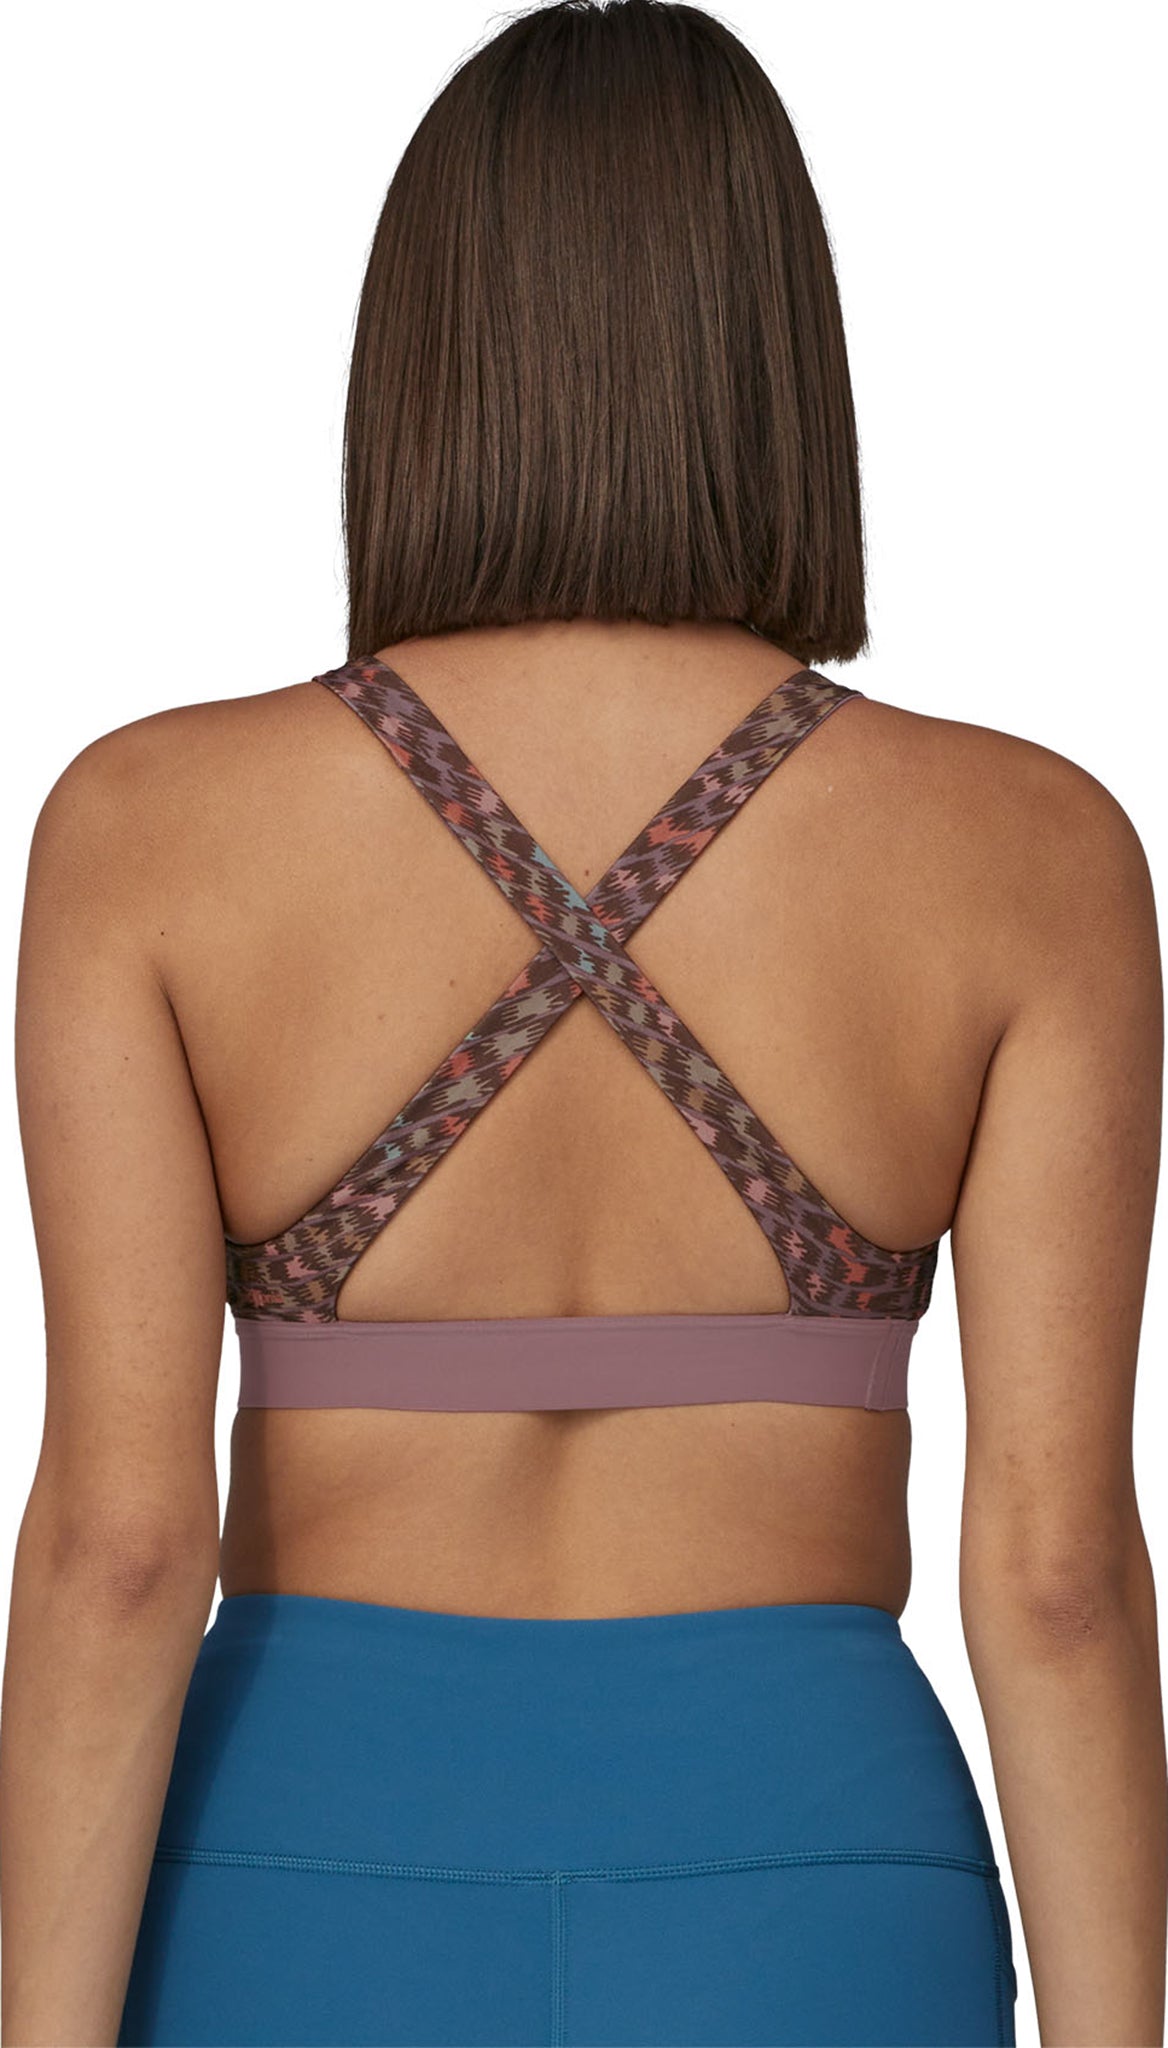 Patagonia Switchback Sports Bra in Purple Pink Blue Floral - Size